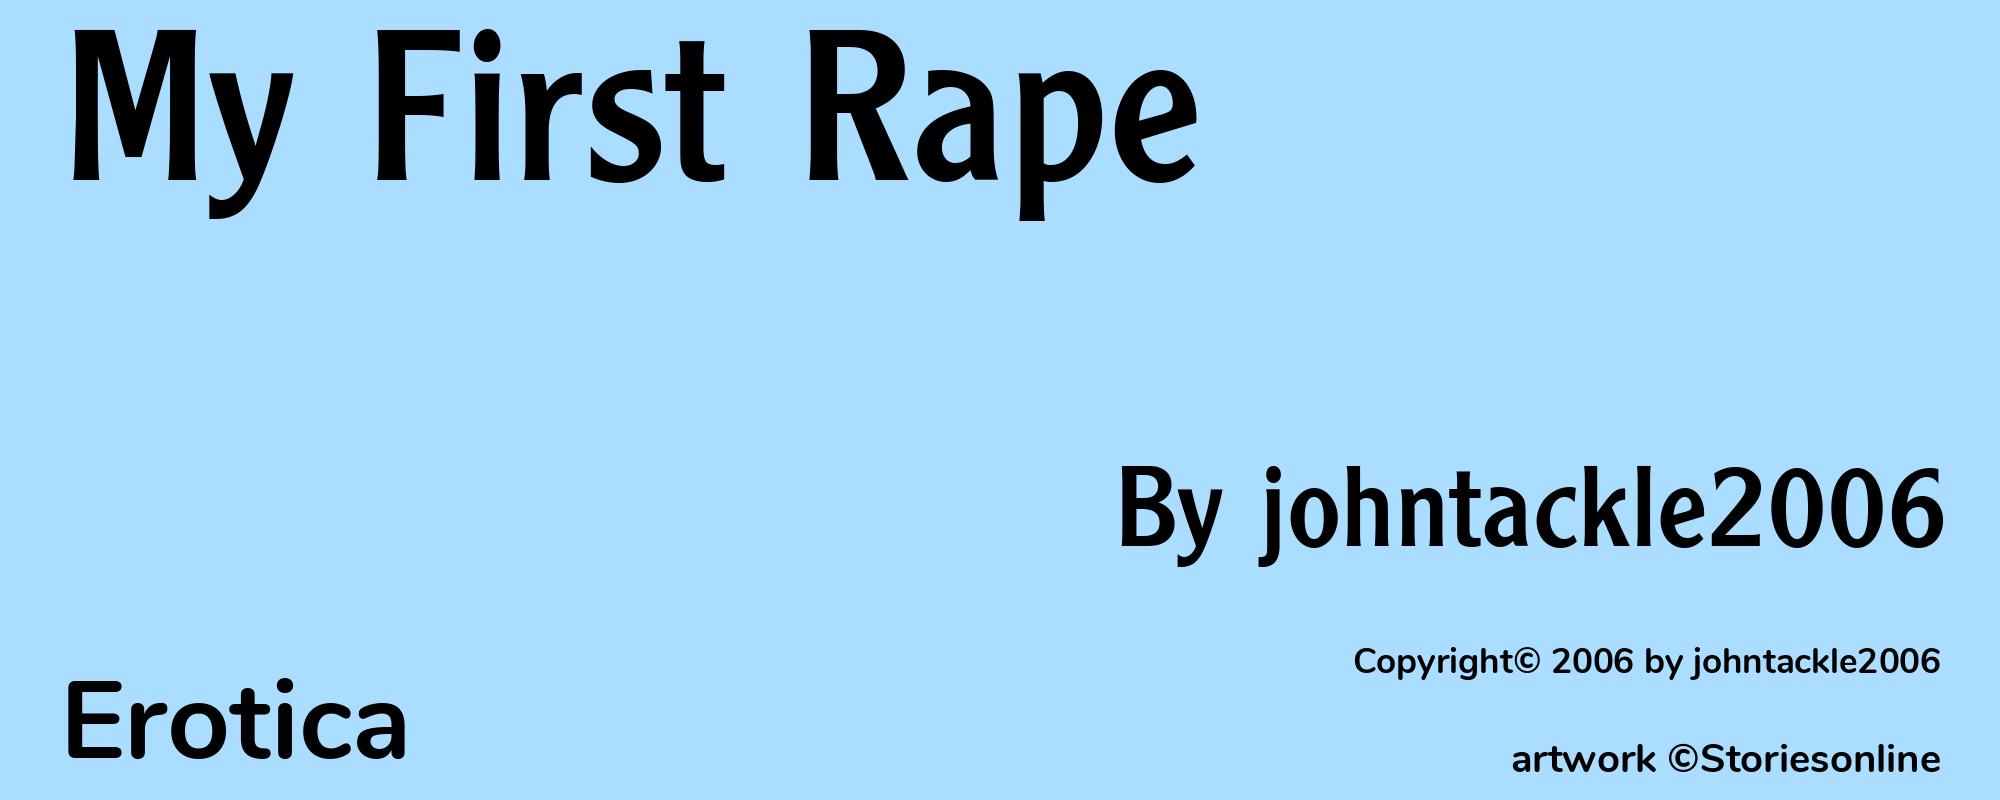 My First Rape - Cover